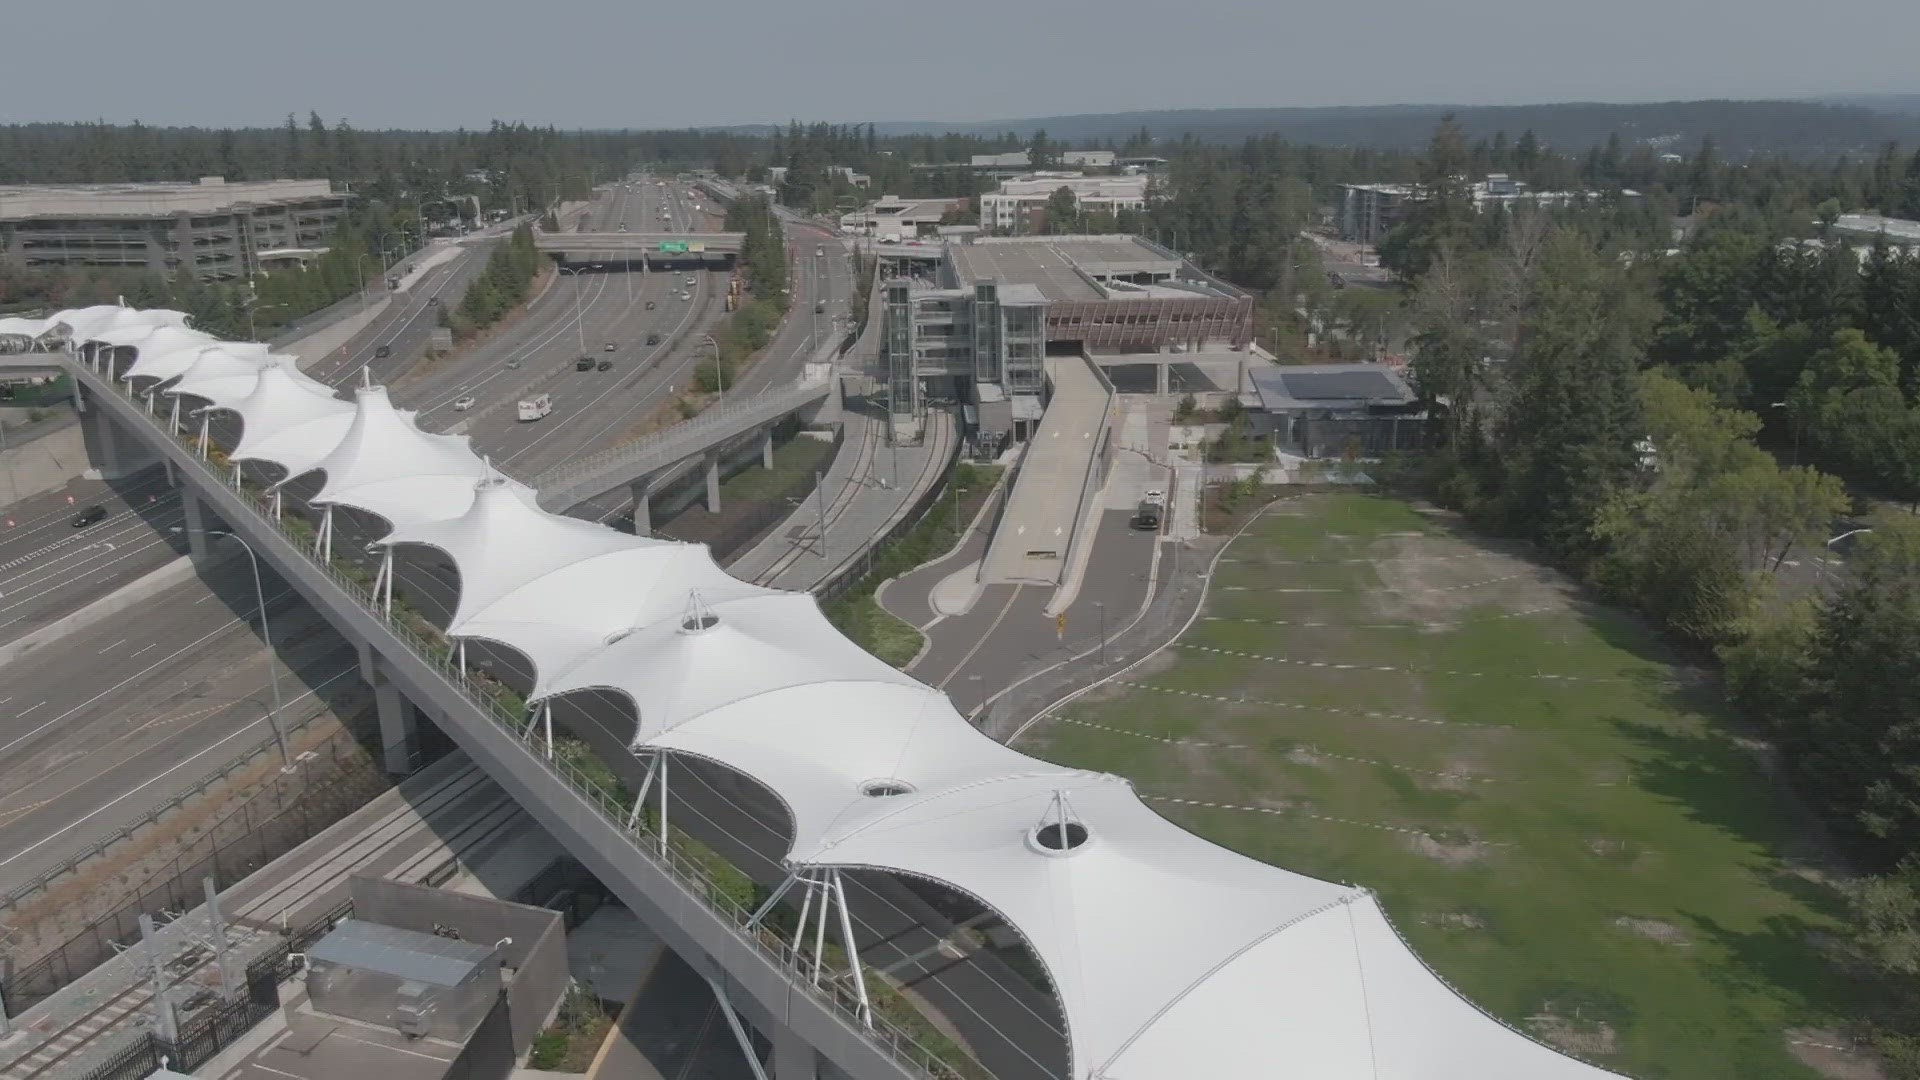 The East Link Starter Line will run from South Bellevue Station to Redmond Technology Station beginning in March 2024.